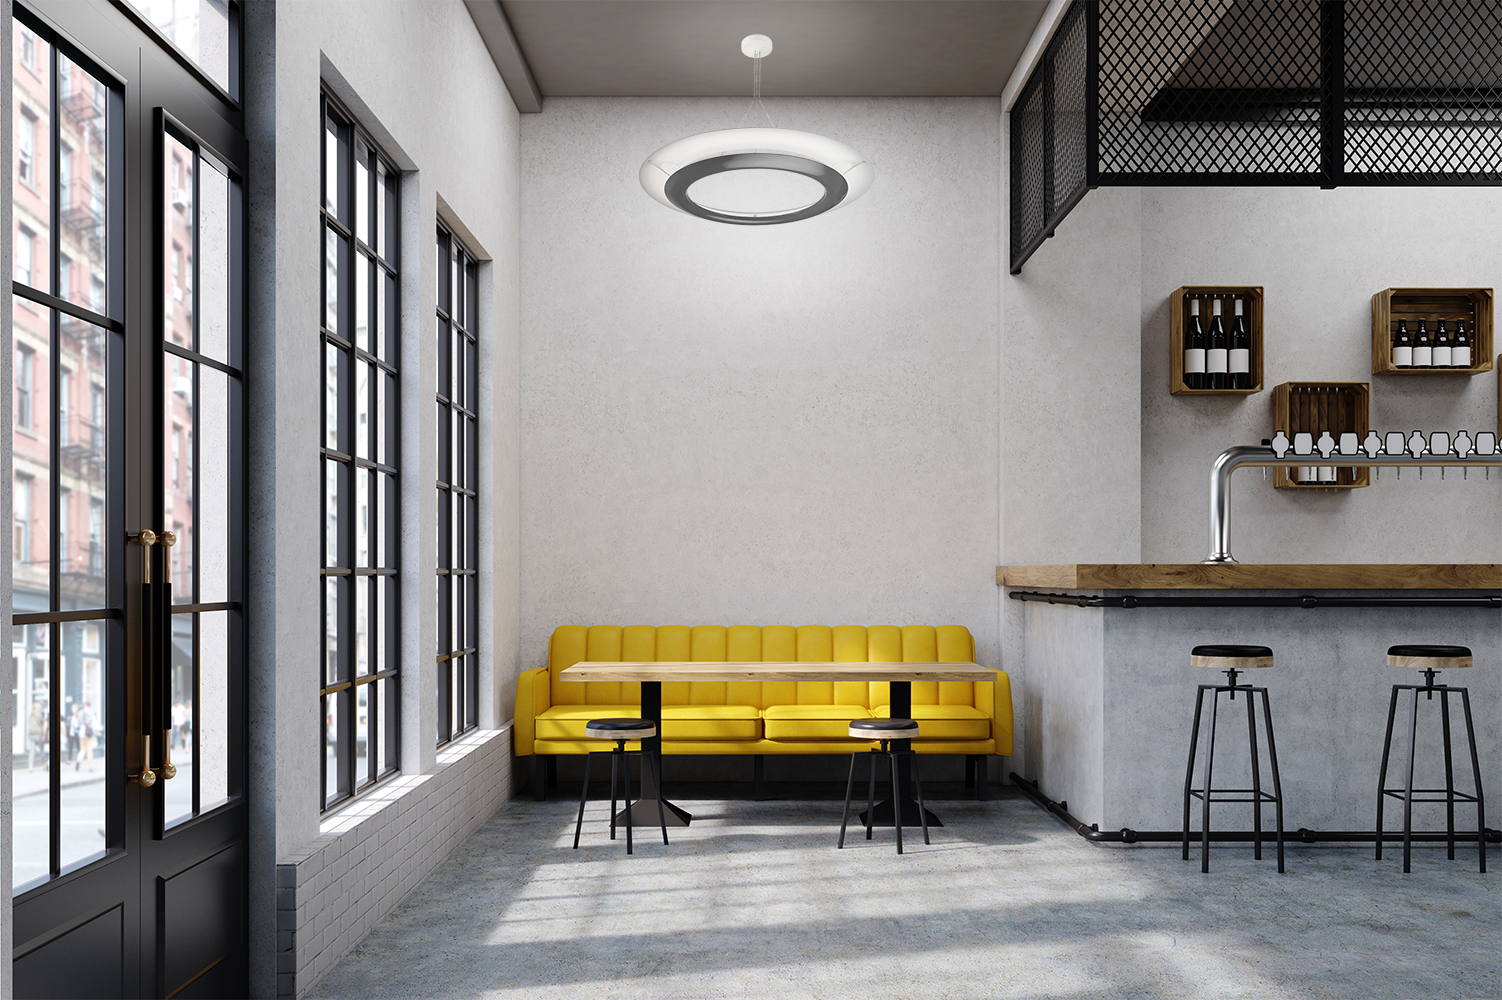 Cosmo ring pendants are perfect for commercial lighting applications, seen here above a yellow couch in a modern bar